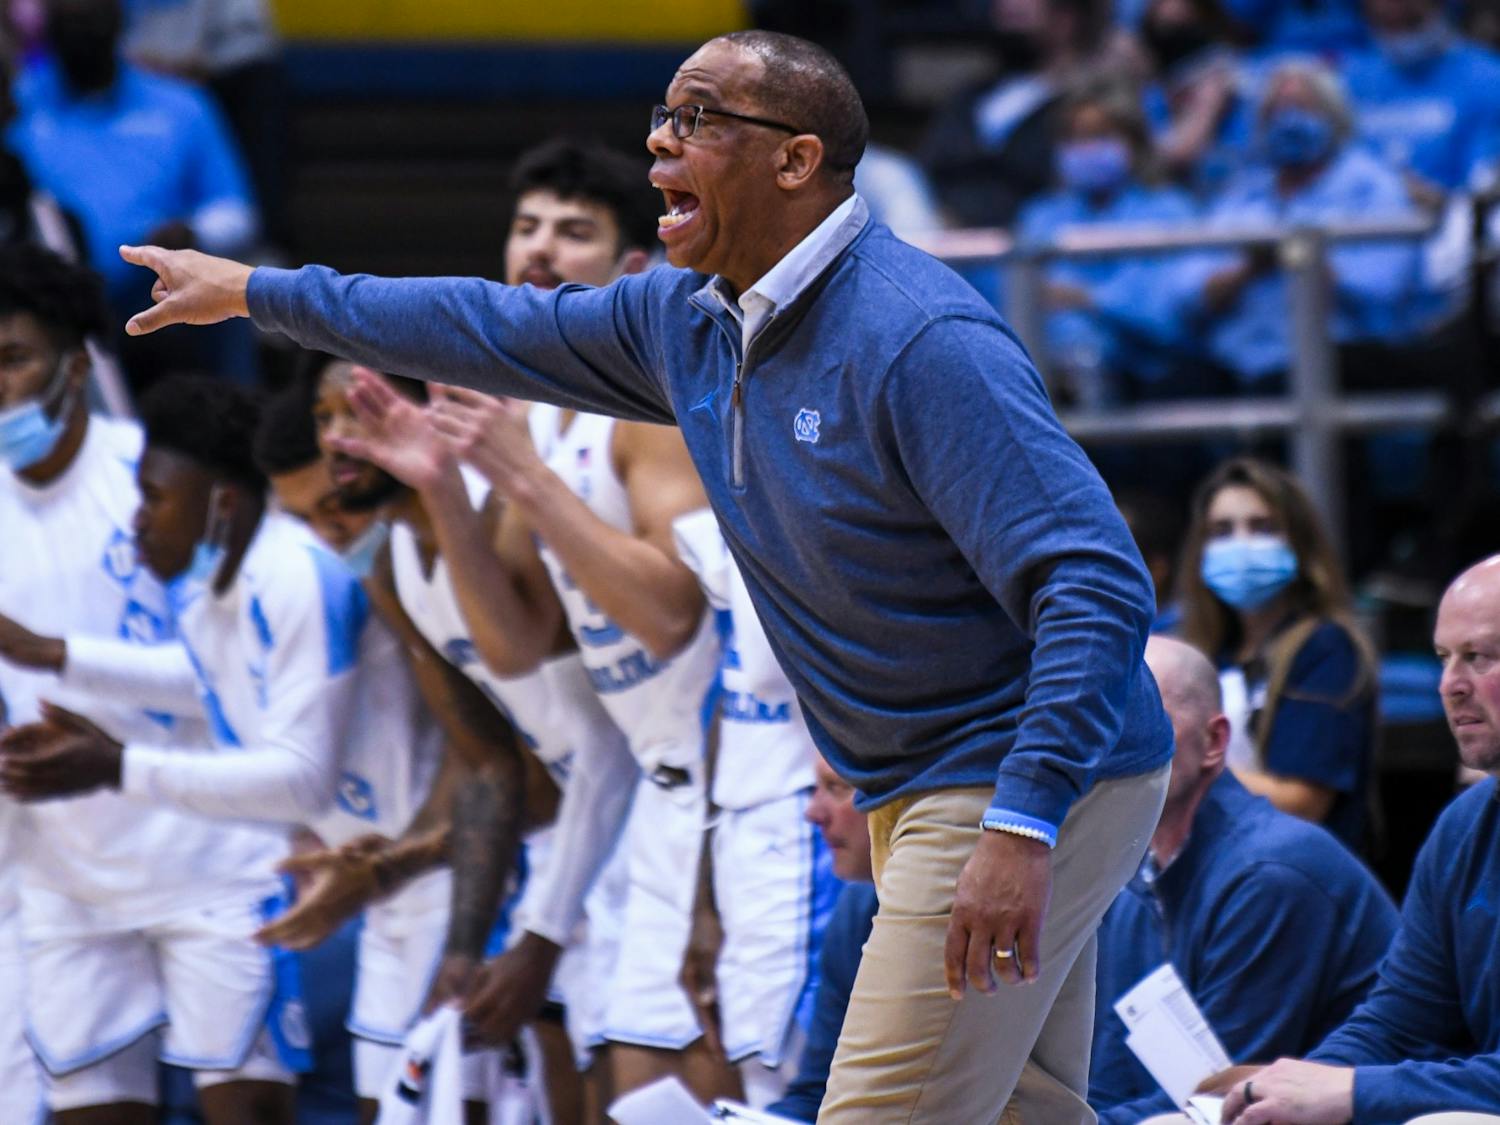 Head coach Hubert Davis directs his team at the game against Appalachian State in the Dean E. Smith Center on Dec 21, 2021. UNC won 70-50.